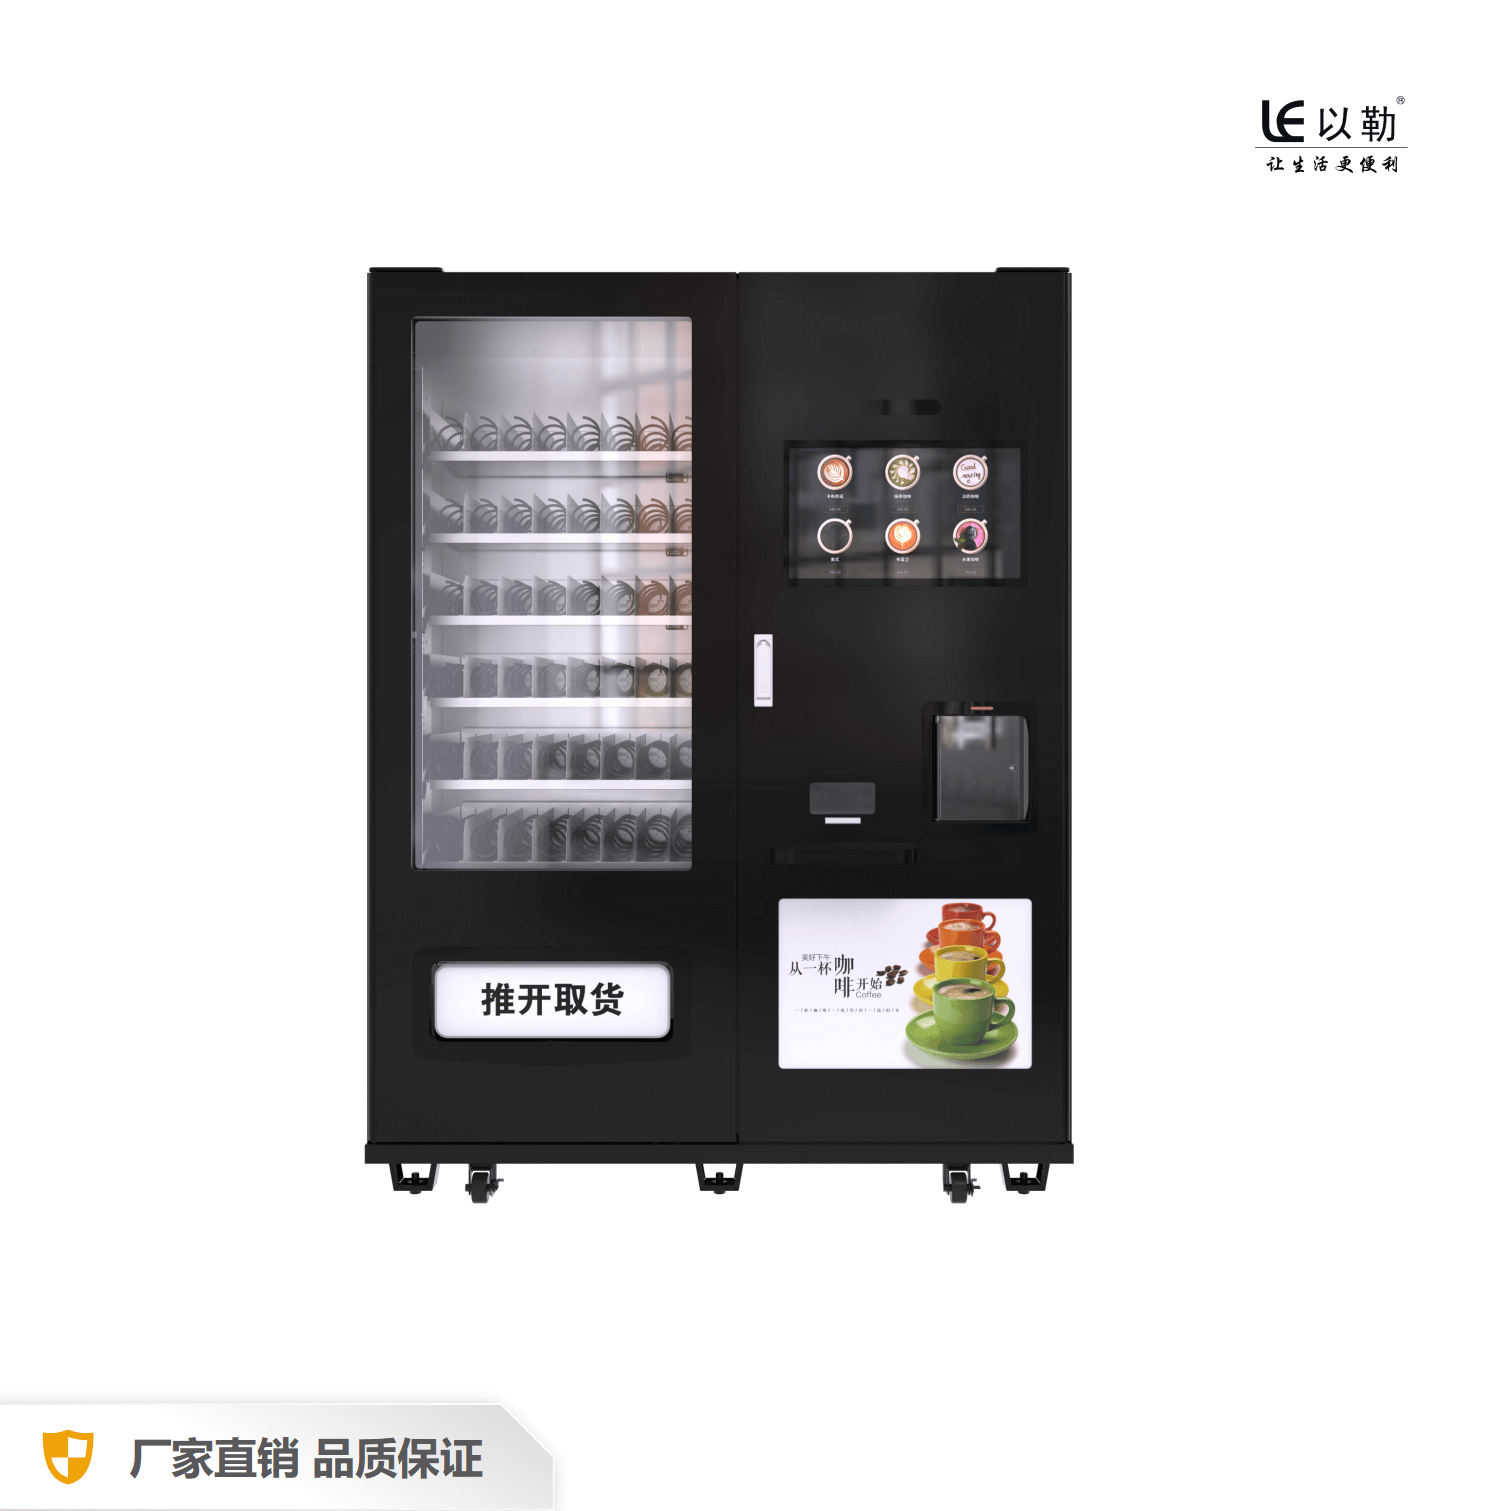 Hot Food Slave Combination Coffee Vending Machine With Wheels